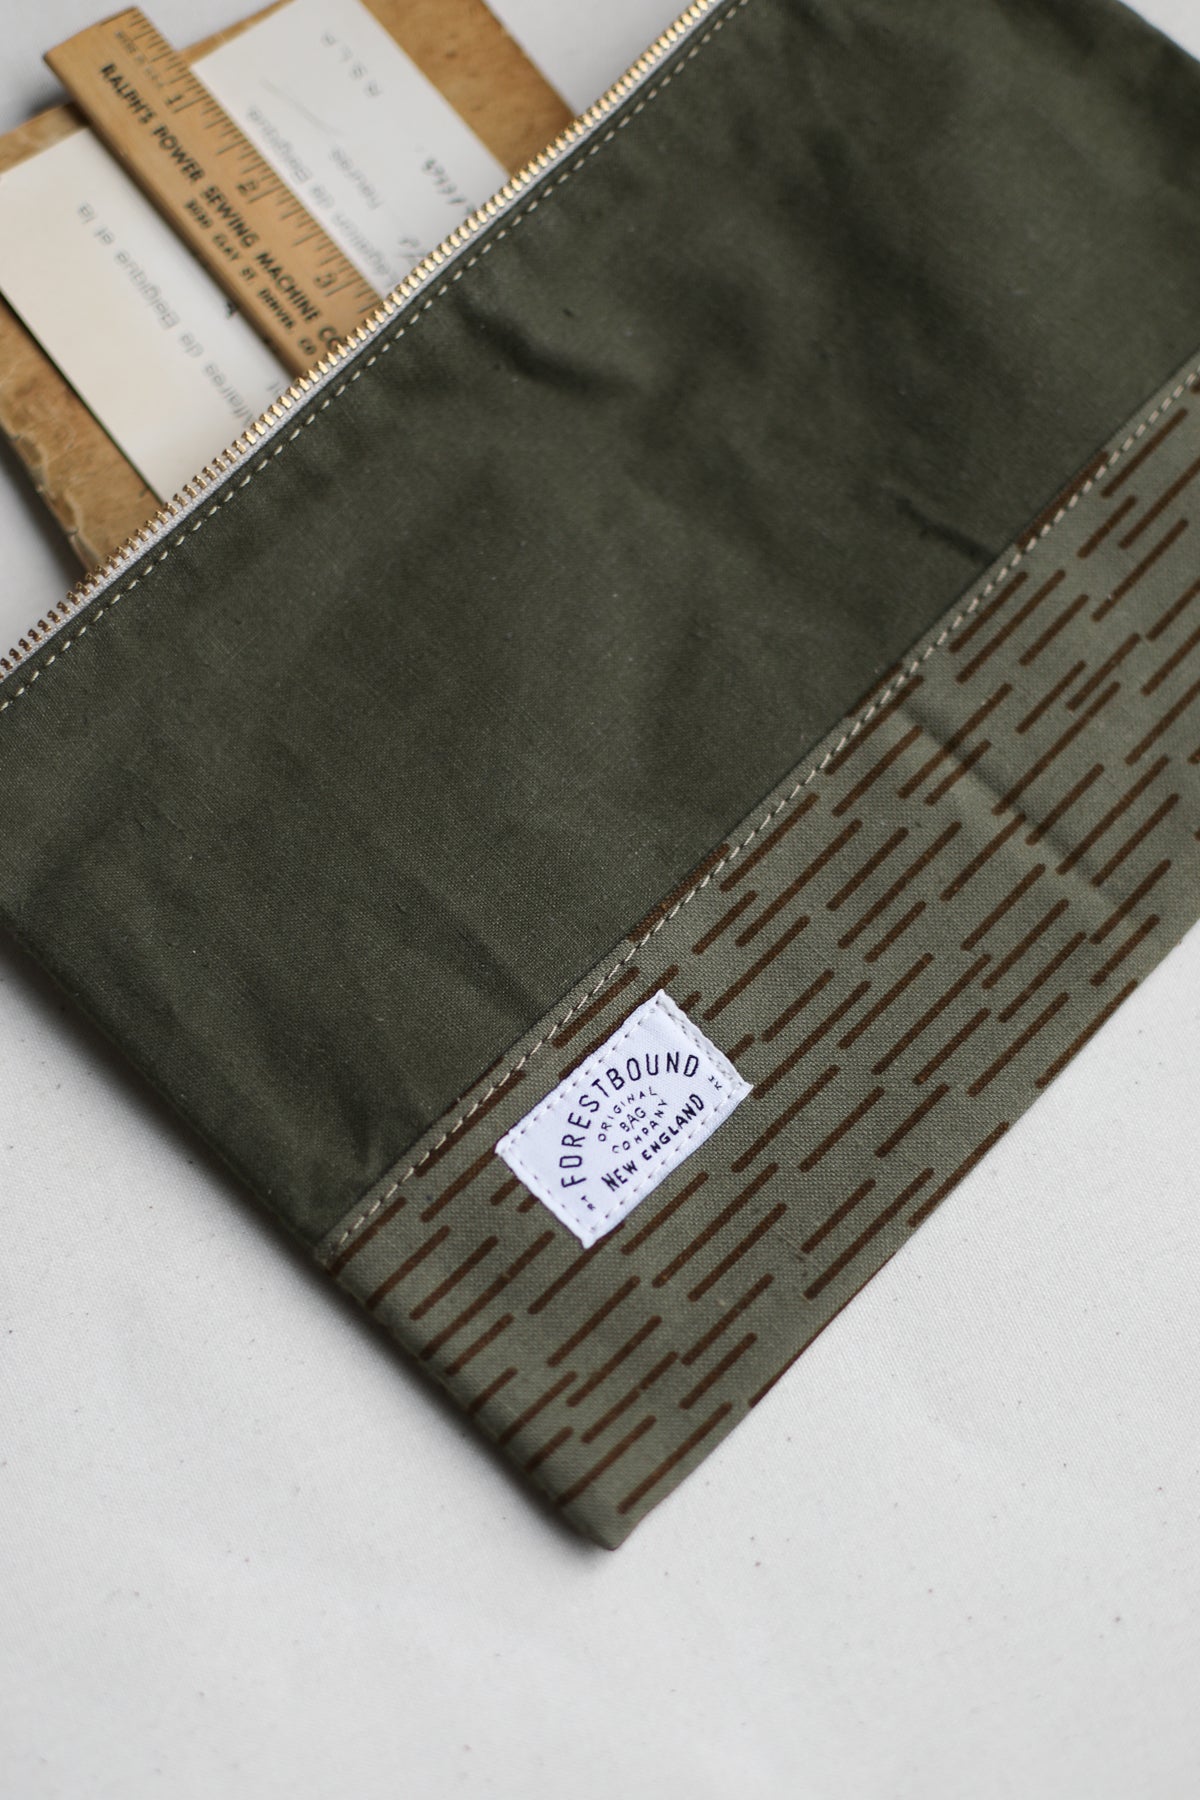 WWII era Salvaged Canvas & Camo Utility Pouch